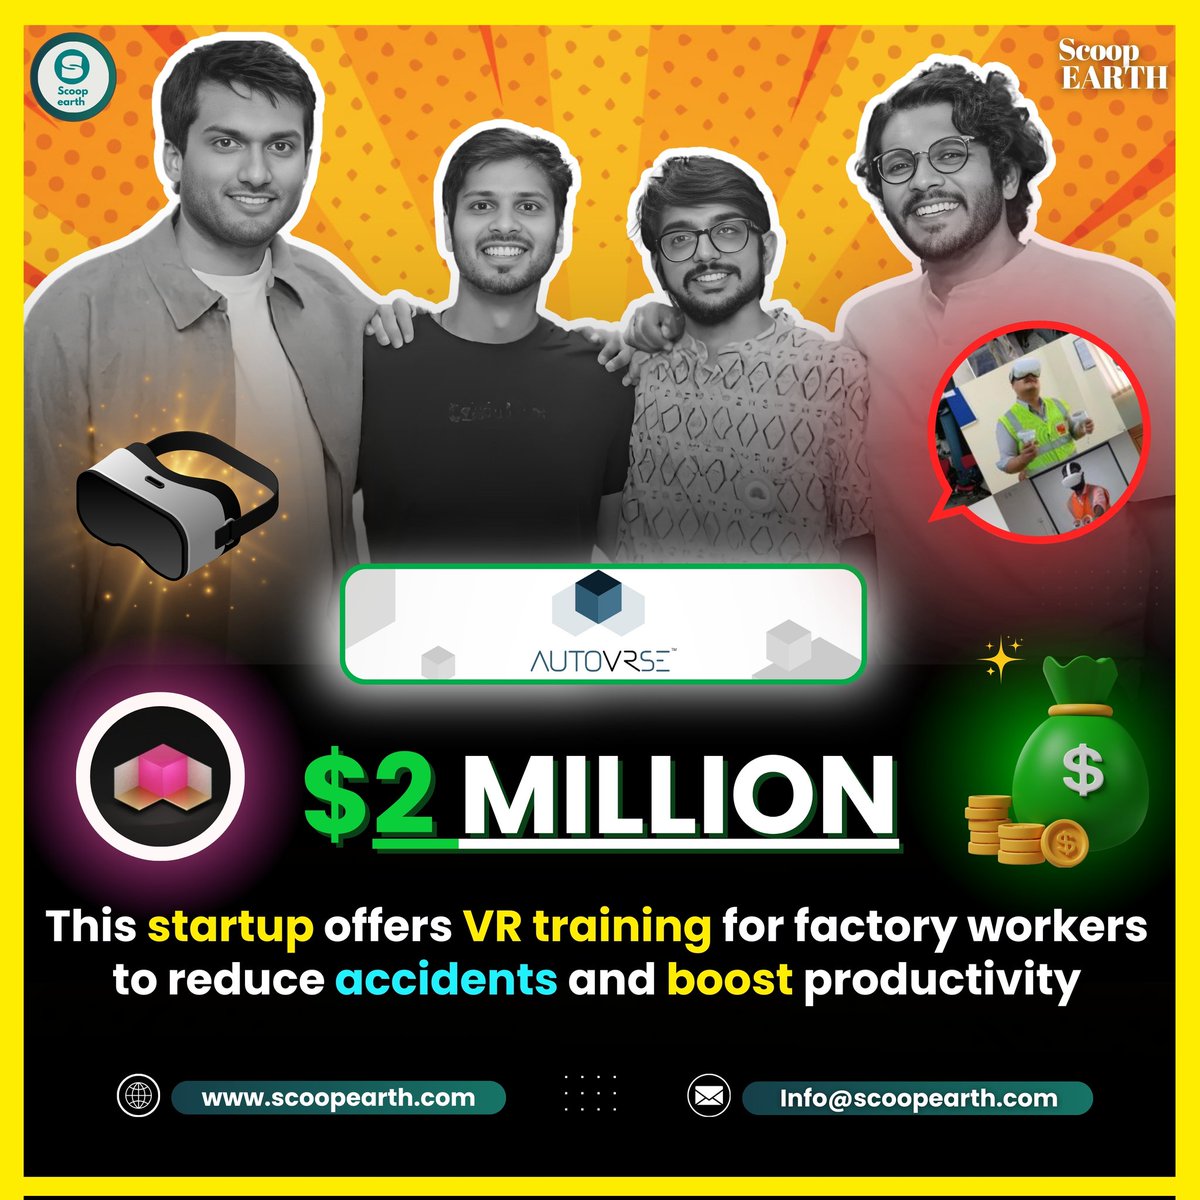 📢 'Virtual reality startup @AutoVRse bags $2 million funding led by Lumikai' 🔔 Source of information 📝👇 moneycontrol.com/news/technolog… Share Your Startup Story 🚀📲 docs.google.com/forms/d/1CCuW-… #scoopearth #autovrse #entrepreneur #startup #vr #workers #traning #gaming